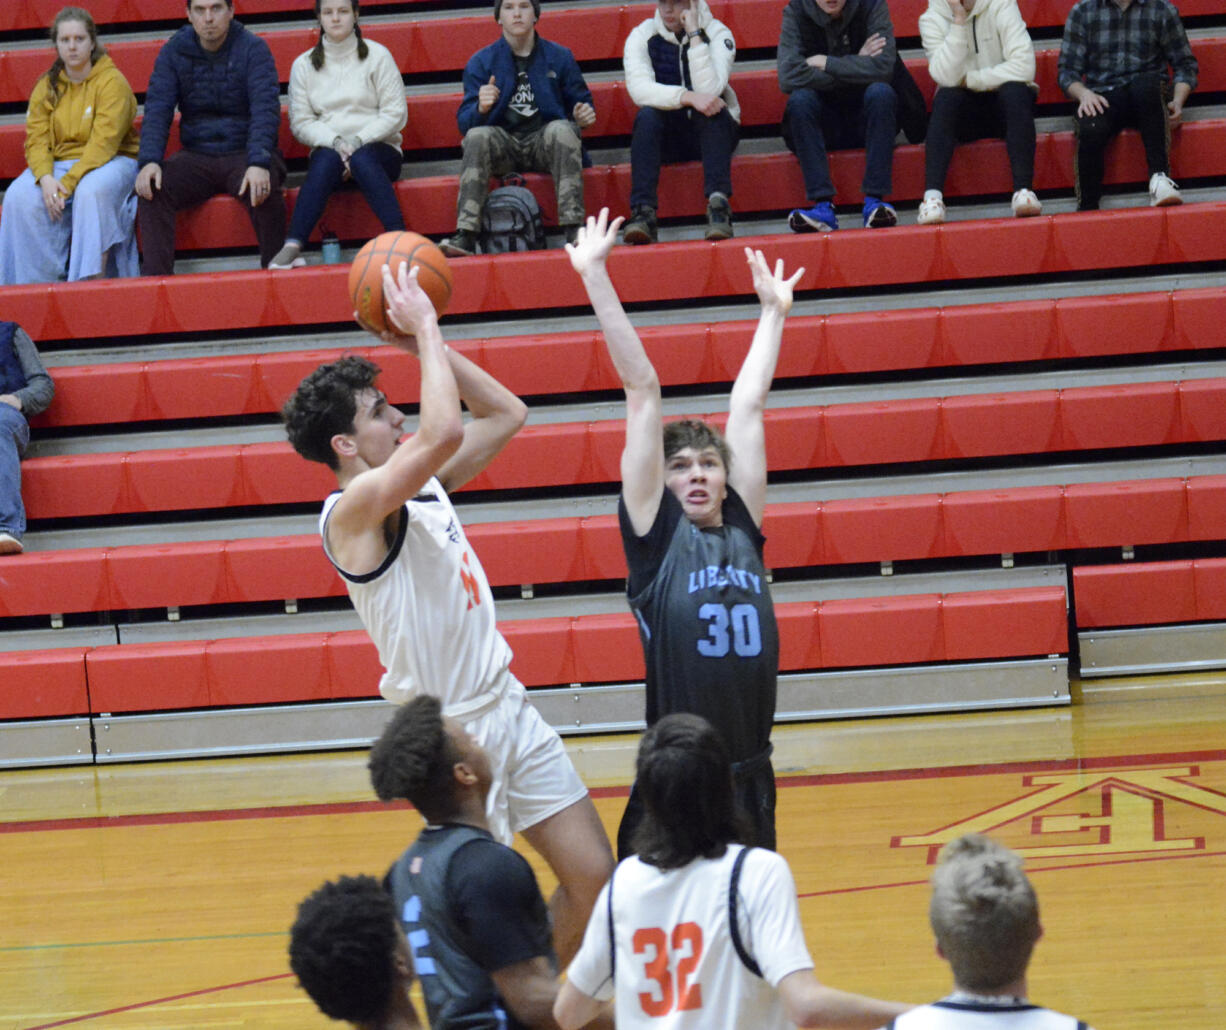 Battle Ground's Tait Spencer shoots the ball over Liberty's Lucas Whitbey (30) during the Tigers' 88-68 win at the Fort Vancouver Holiday Classic on Wednesday, Dec. 28, 2022.